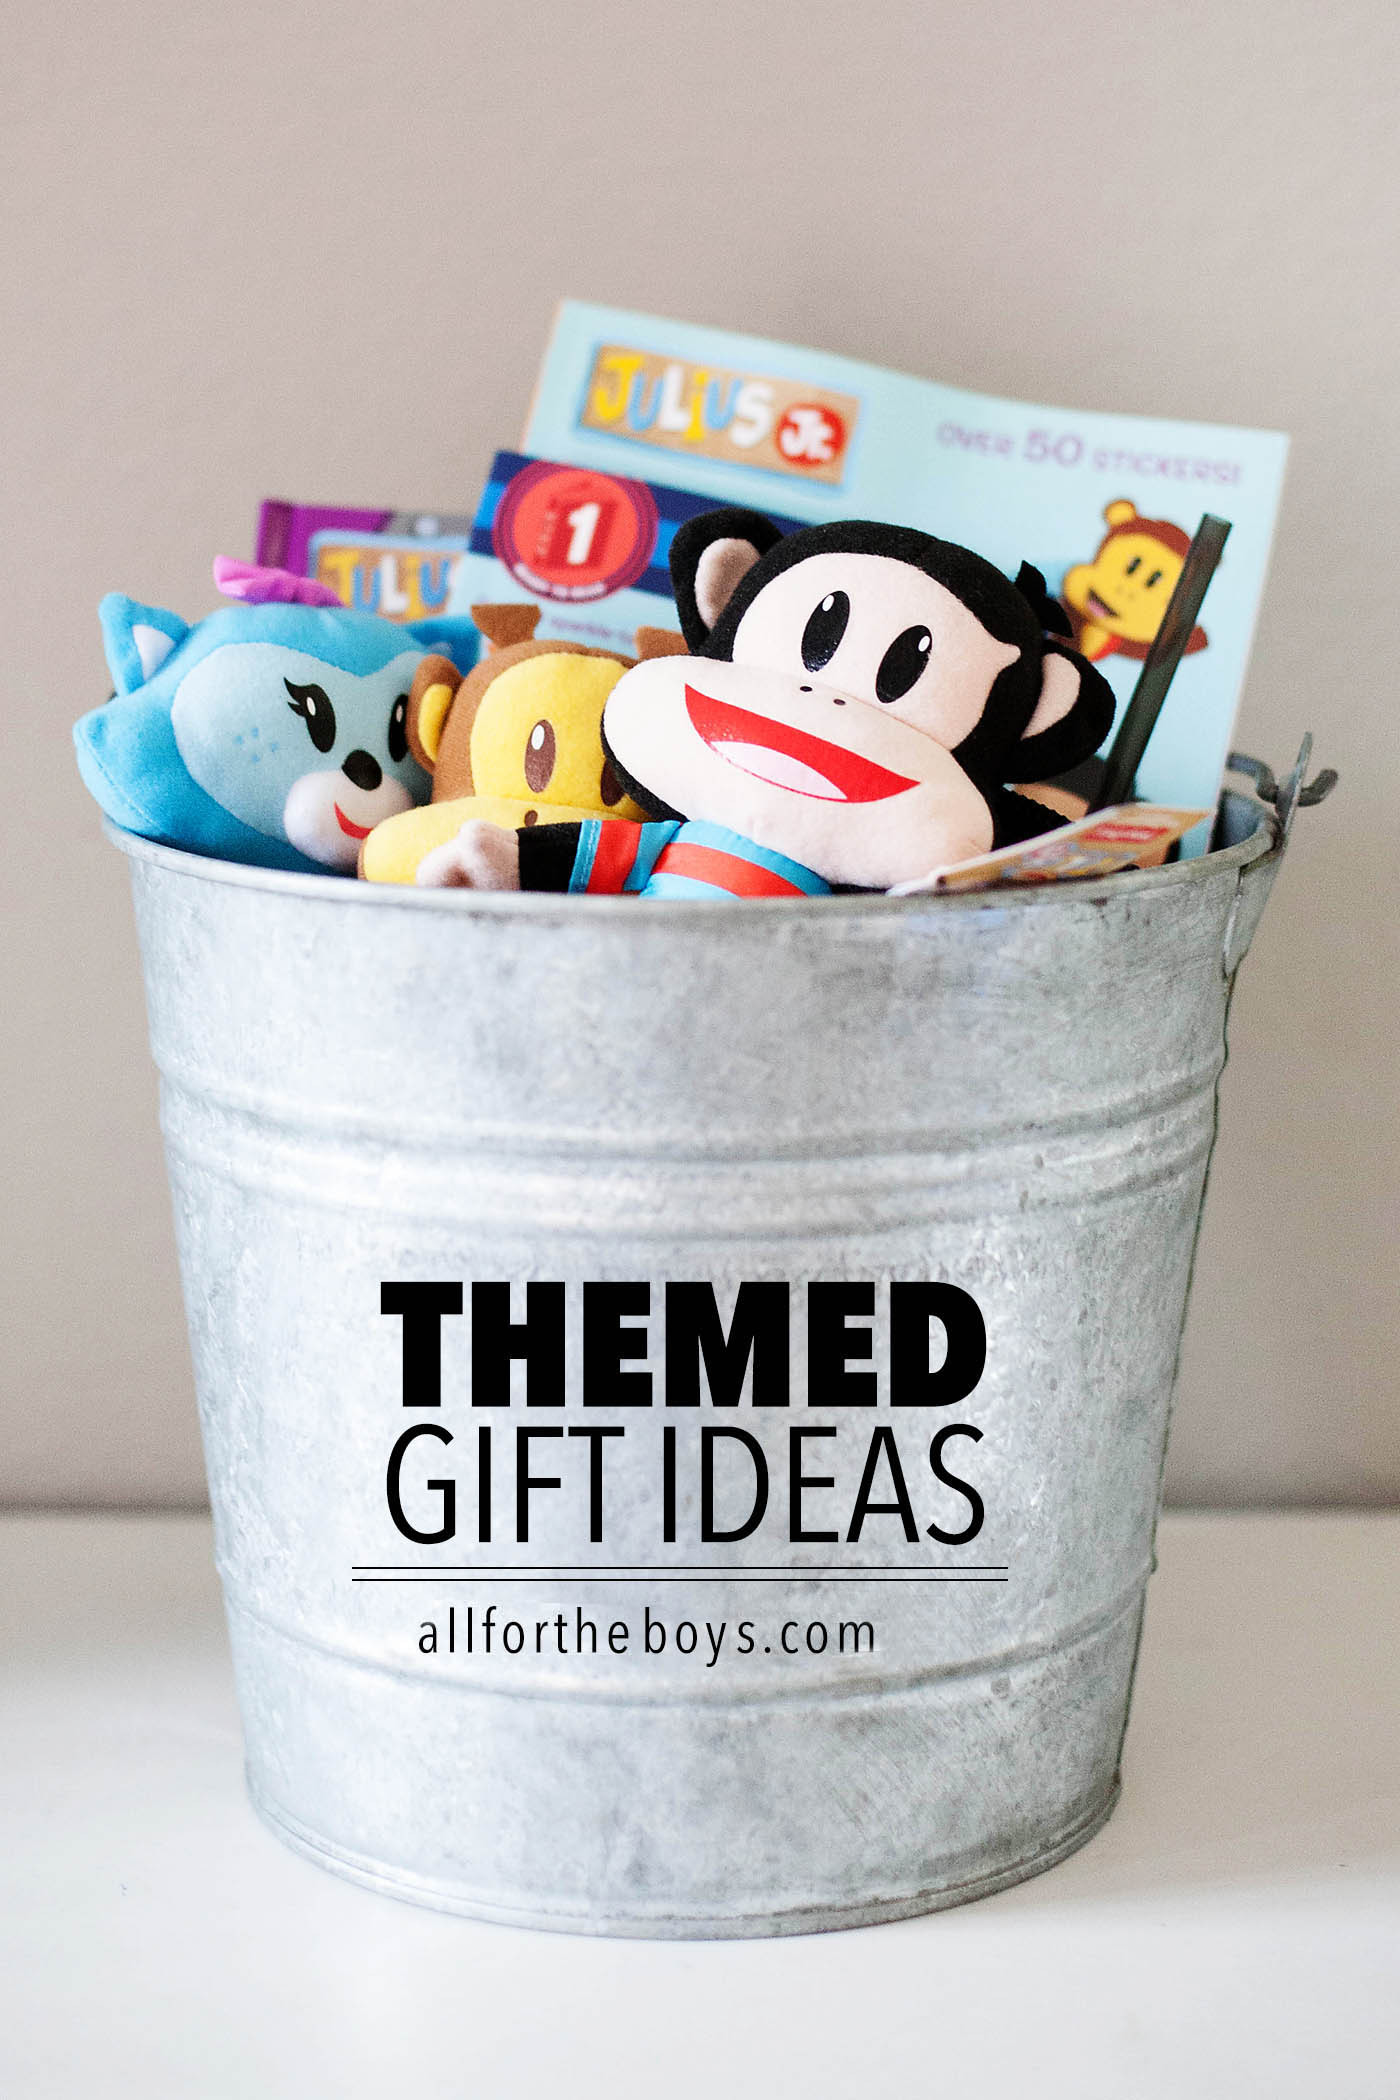 Gift Ideas For Toddler Boys
 Themed Gift Ideas for Kids — All for the Boys